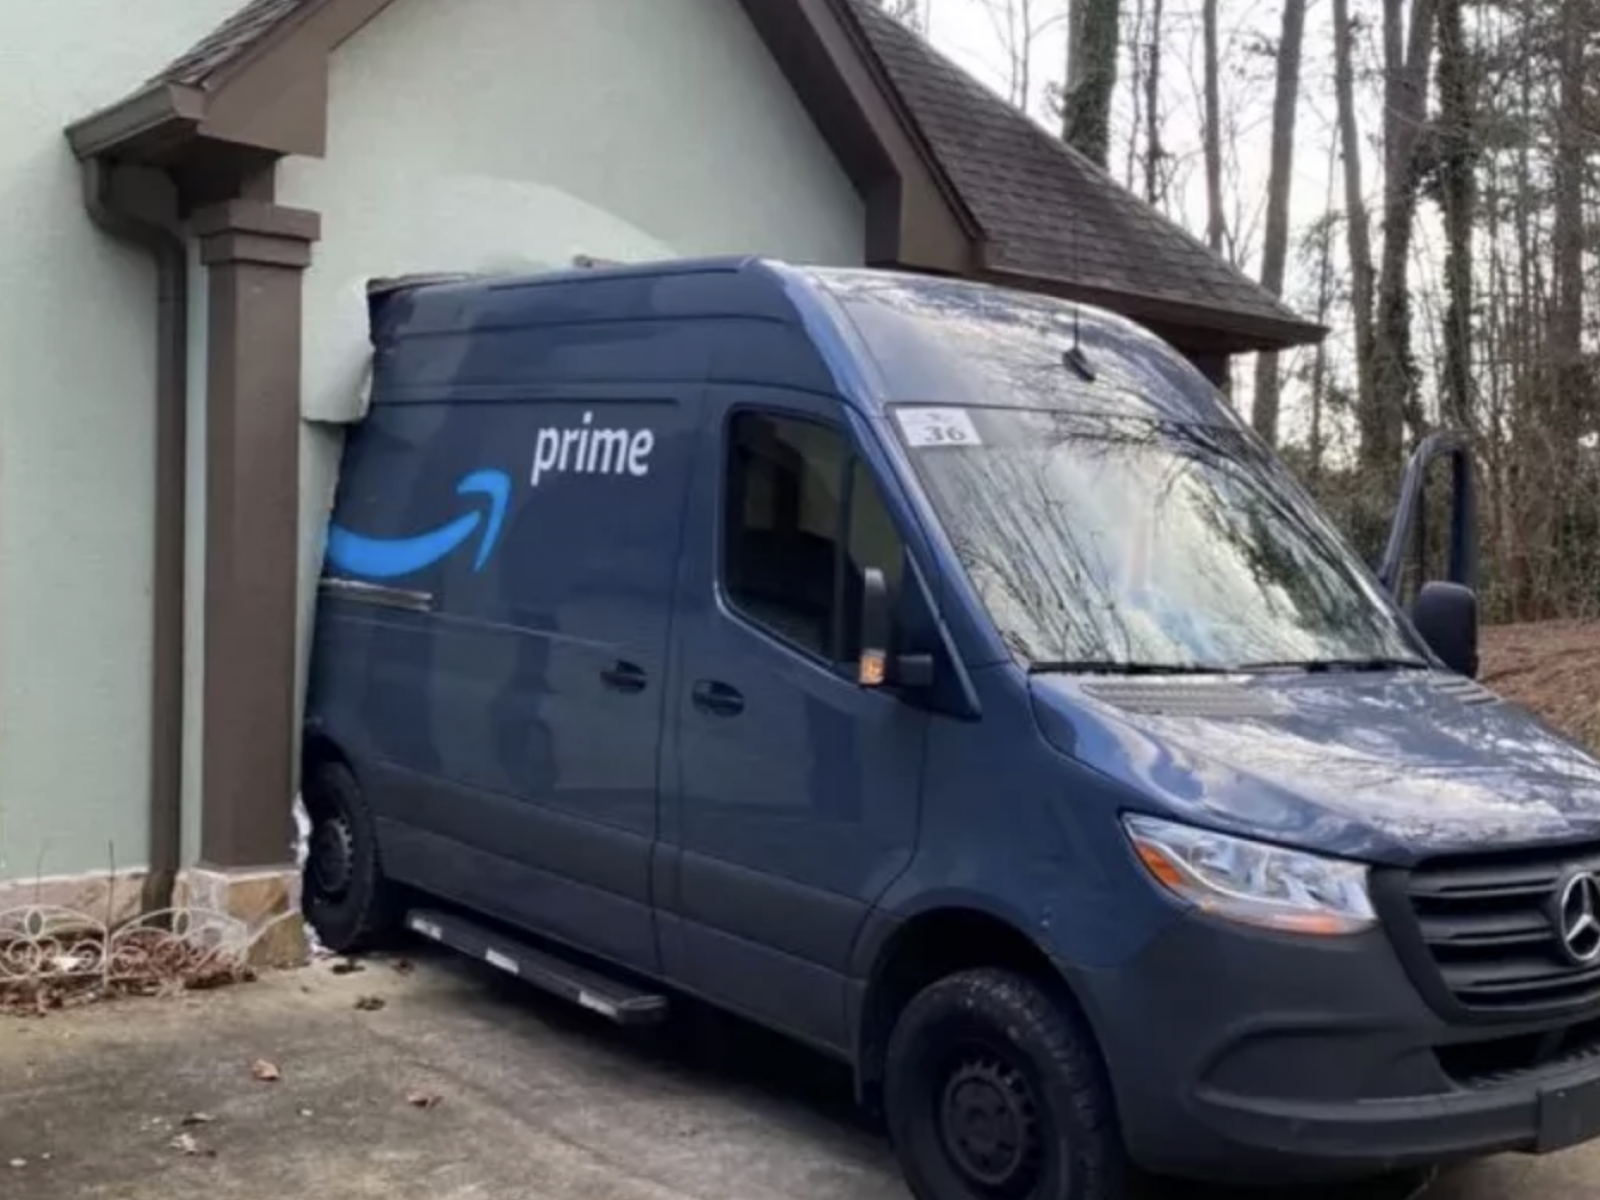 Amazon Delivery Truck Smashes Through Front Door Of Home In Georgia